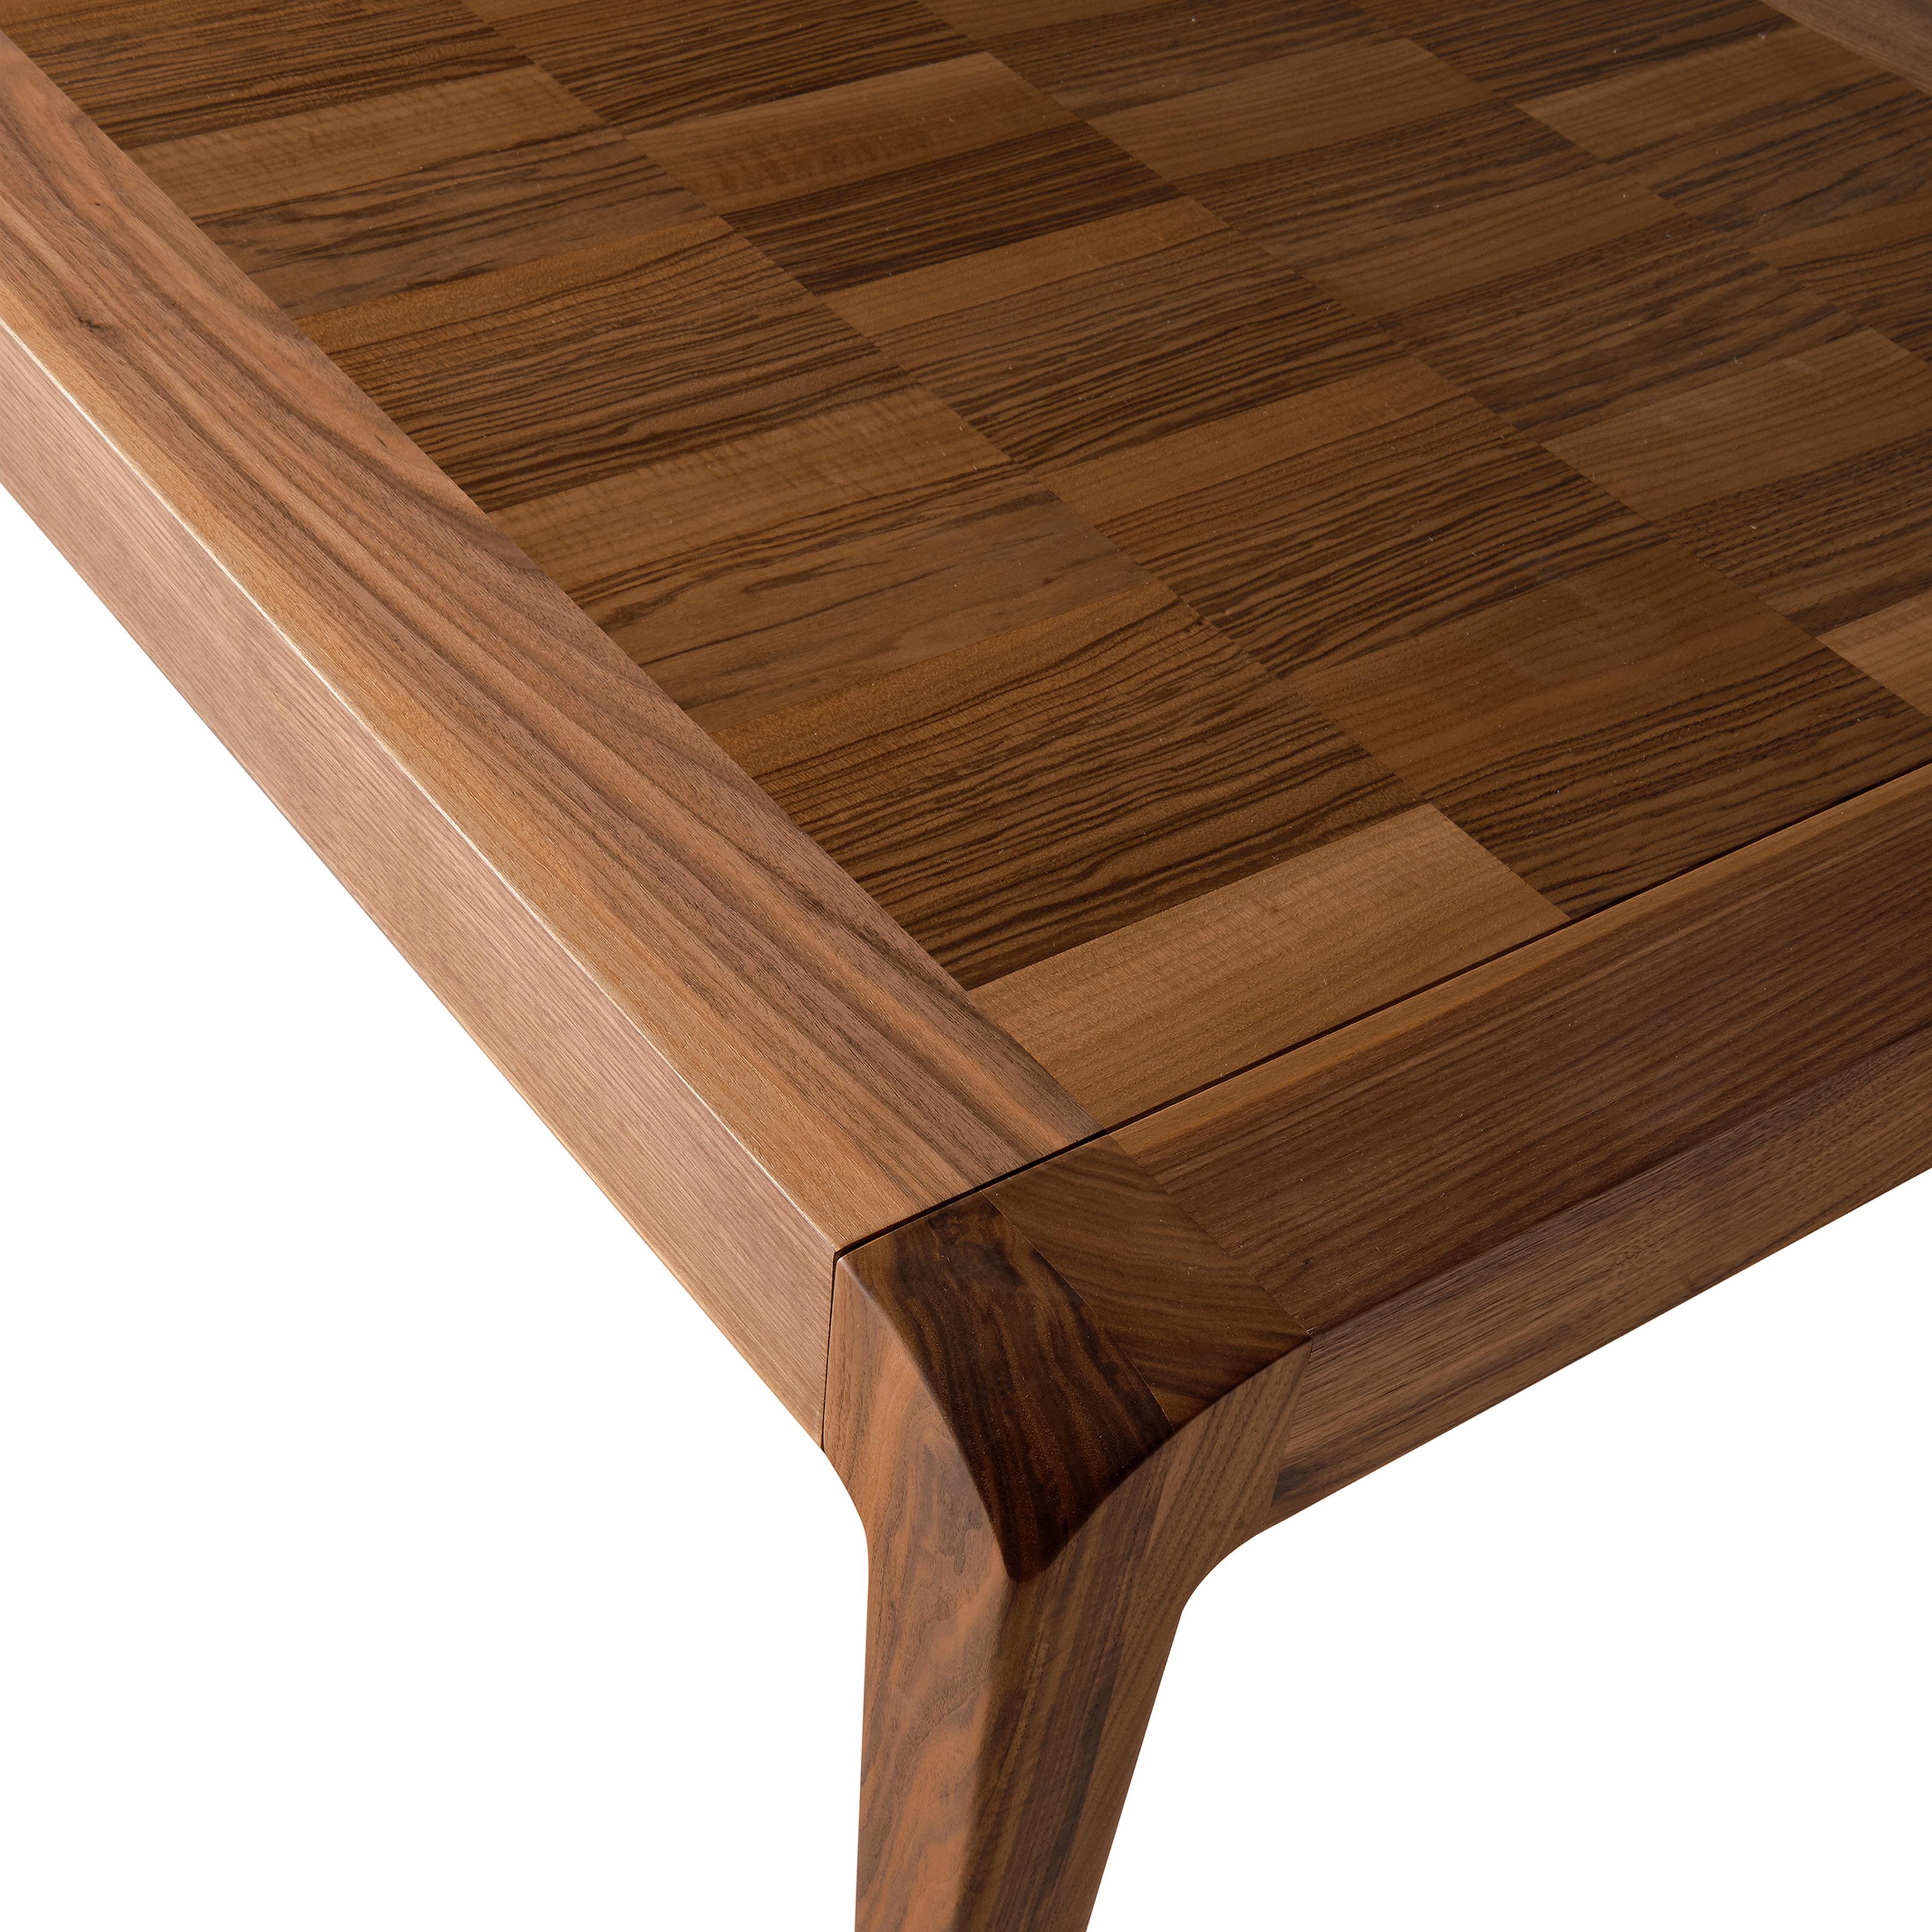 Italian Sentiero Solid Wood Table, Walnut in Hand-Made Natural Finish, Contemporary For Sale